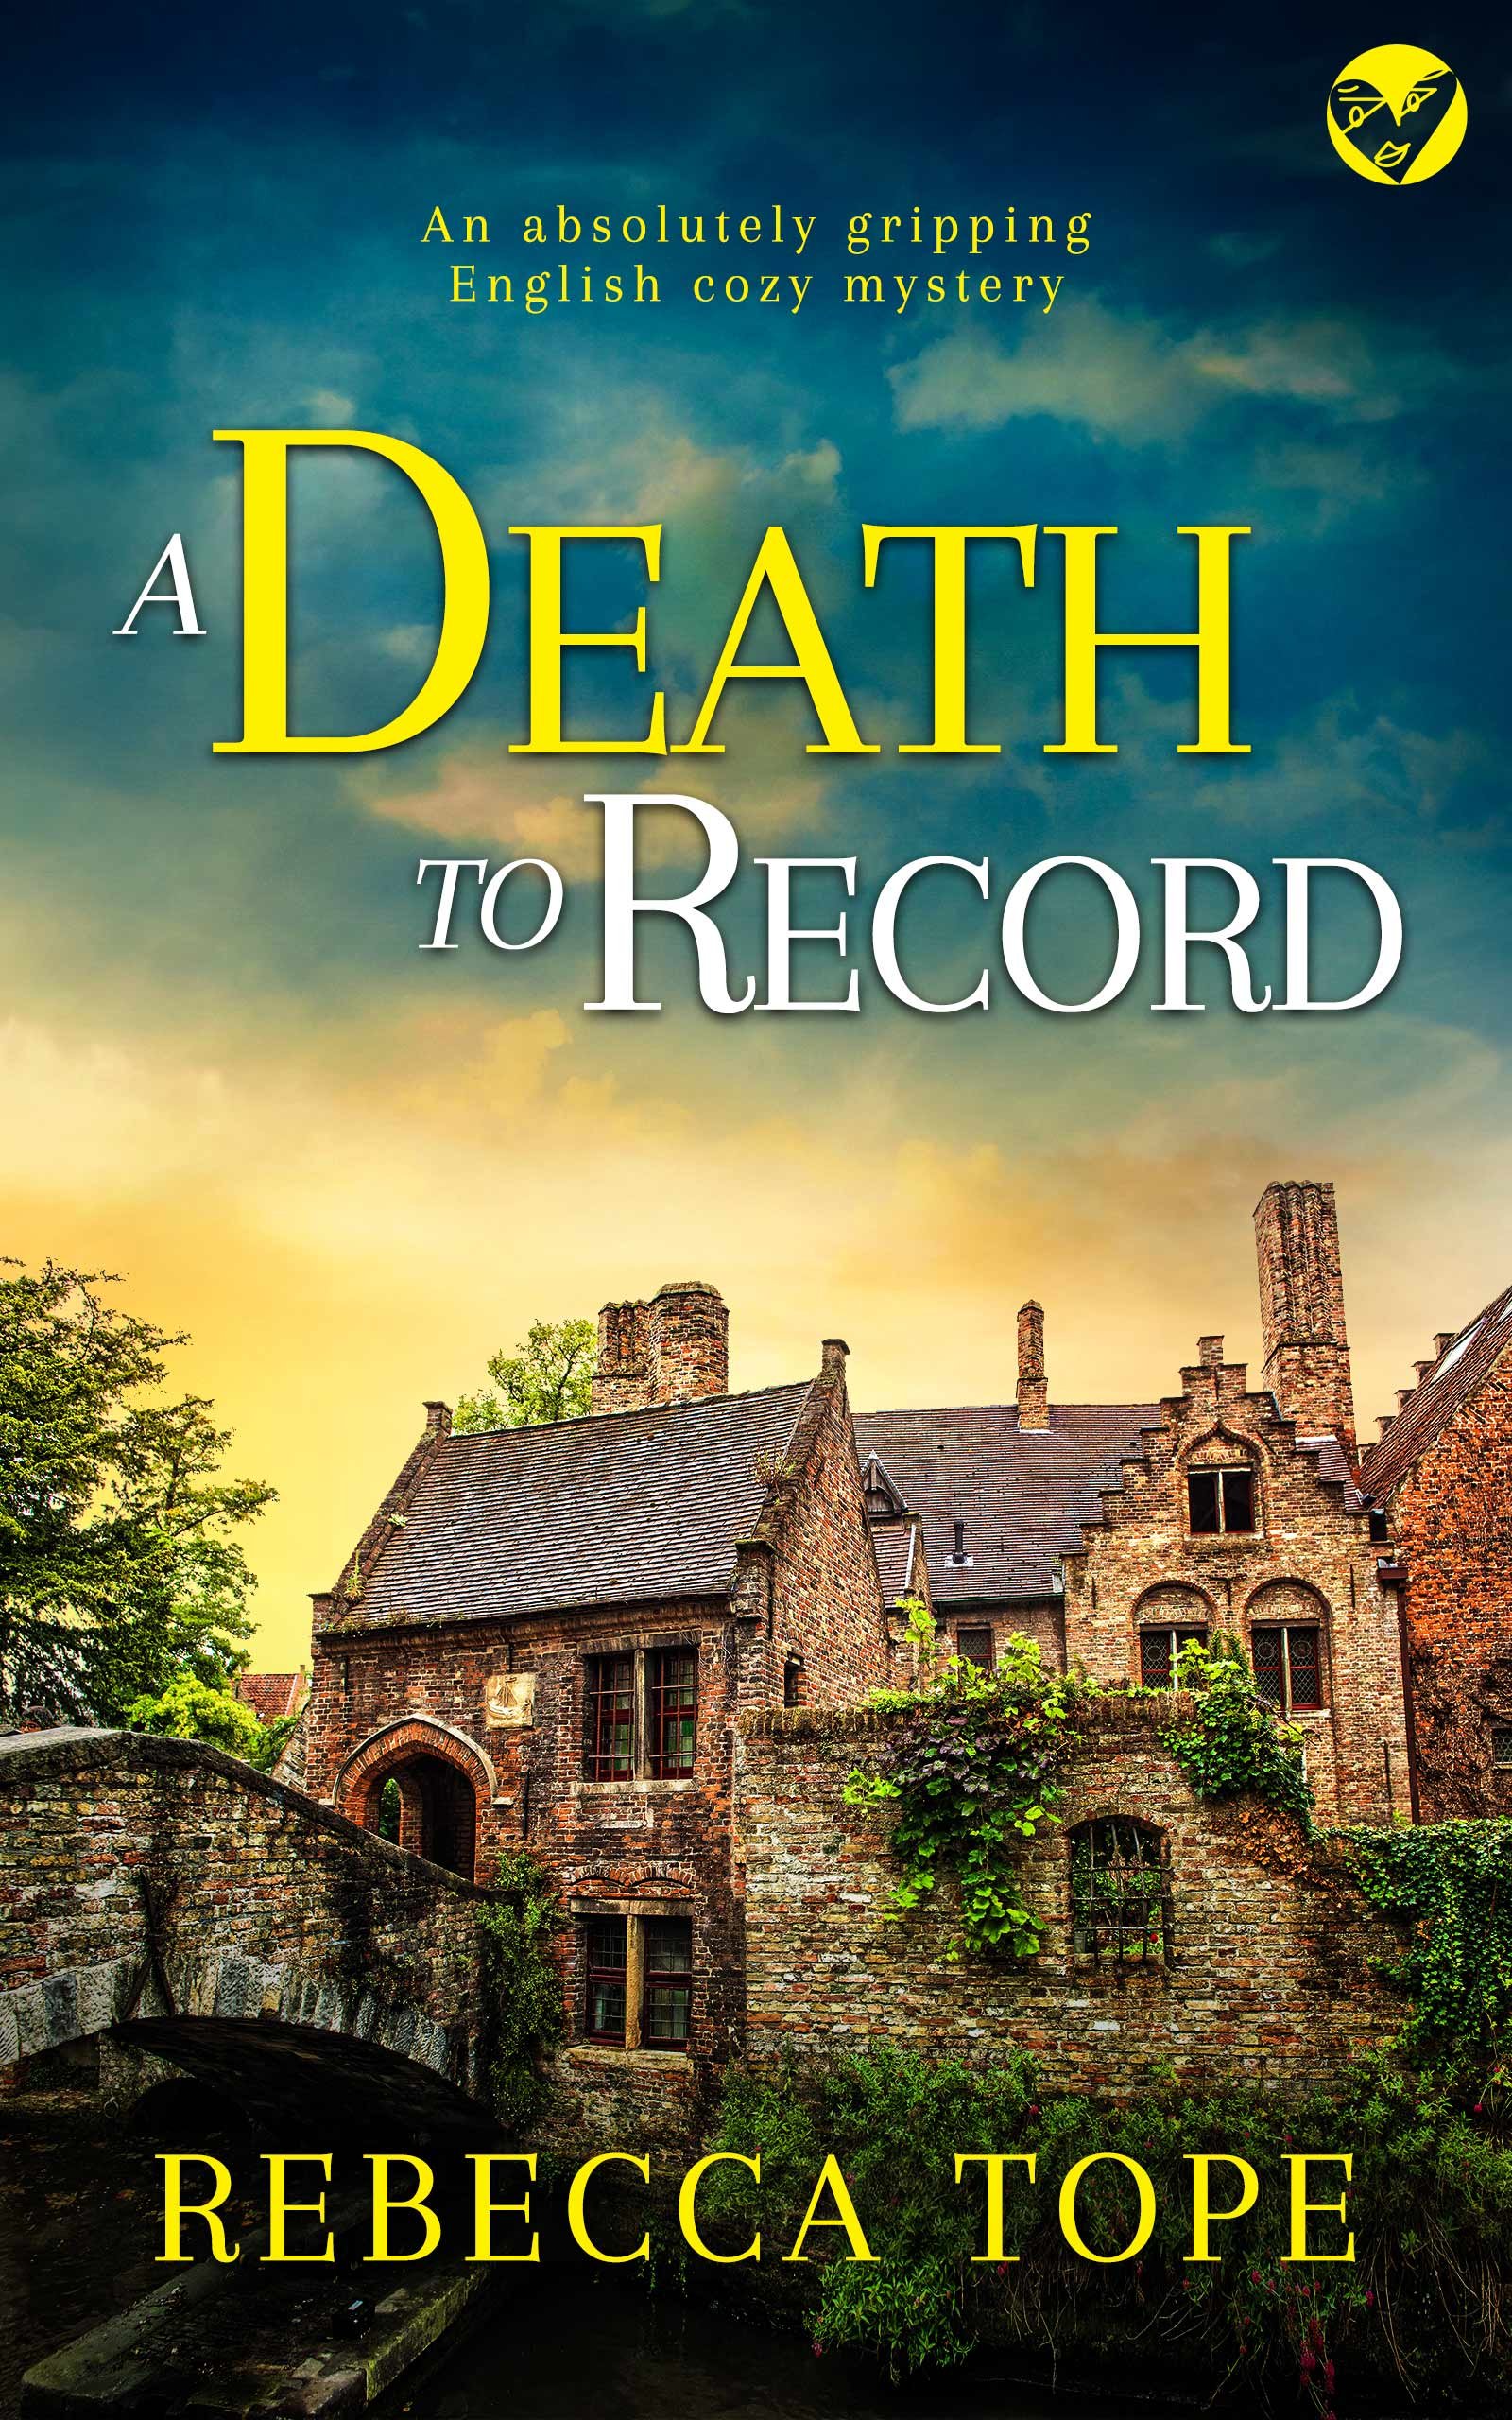 A DEATH TO RECORD Cover publish 607KB.jpg